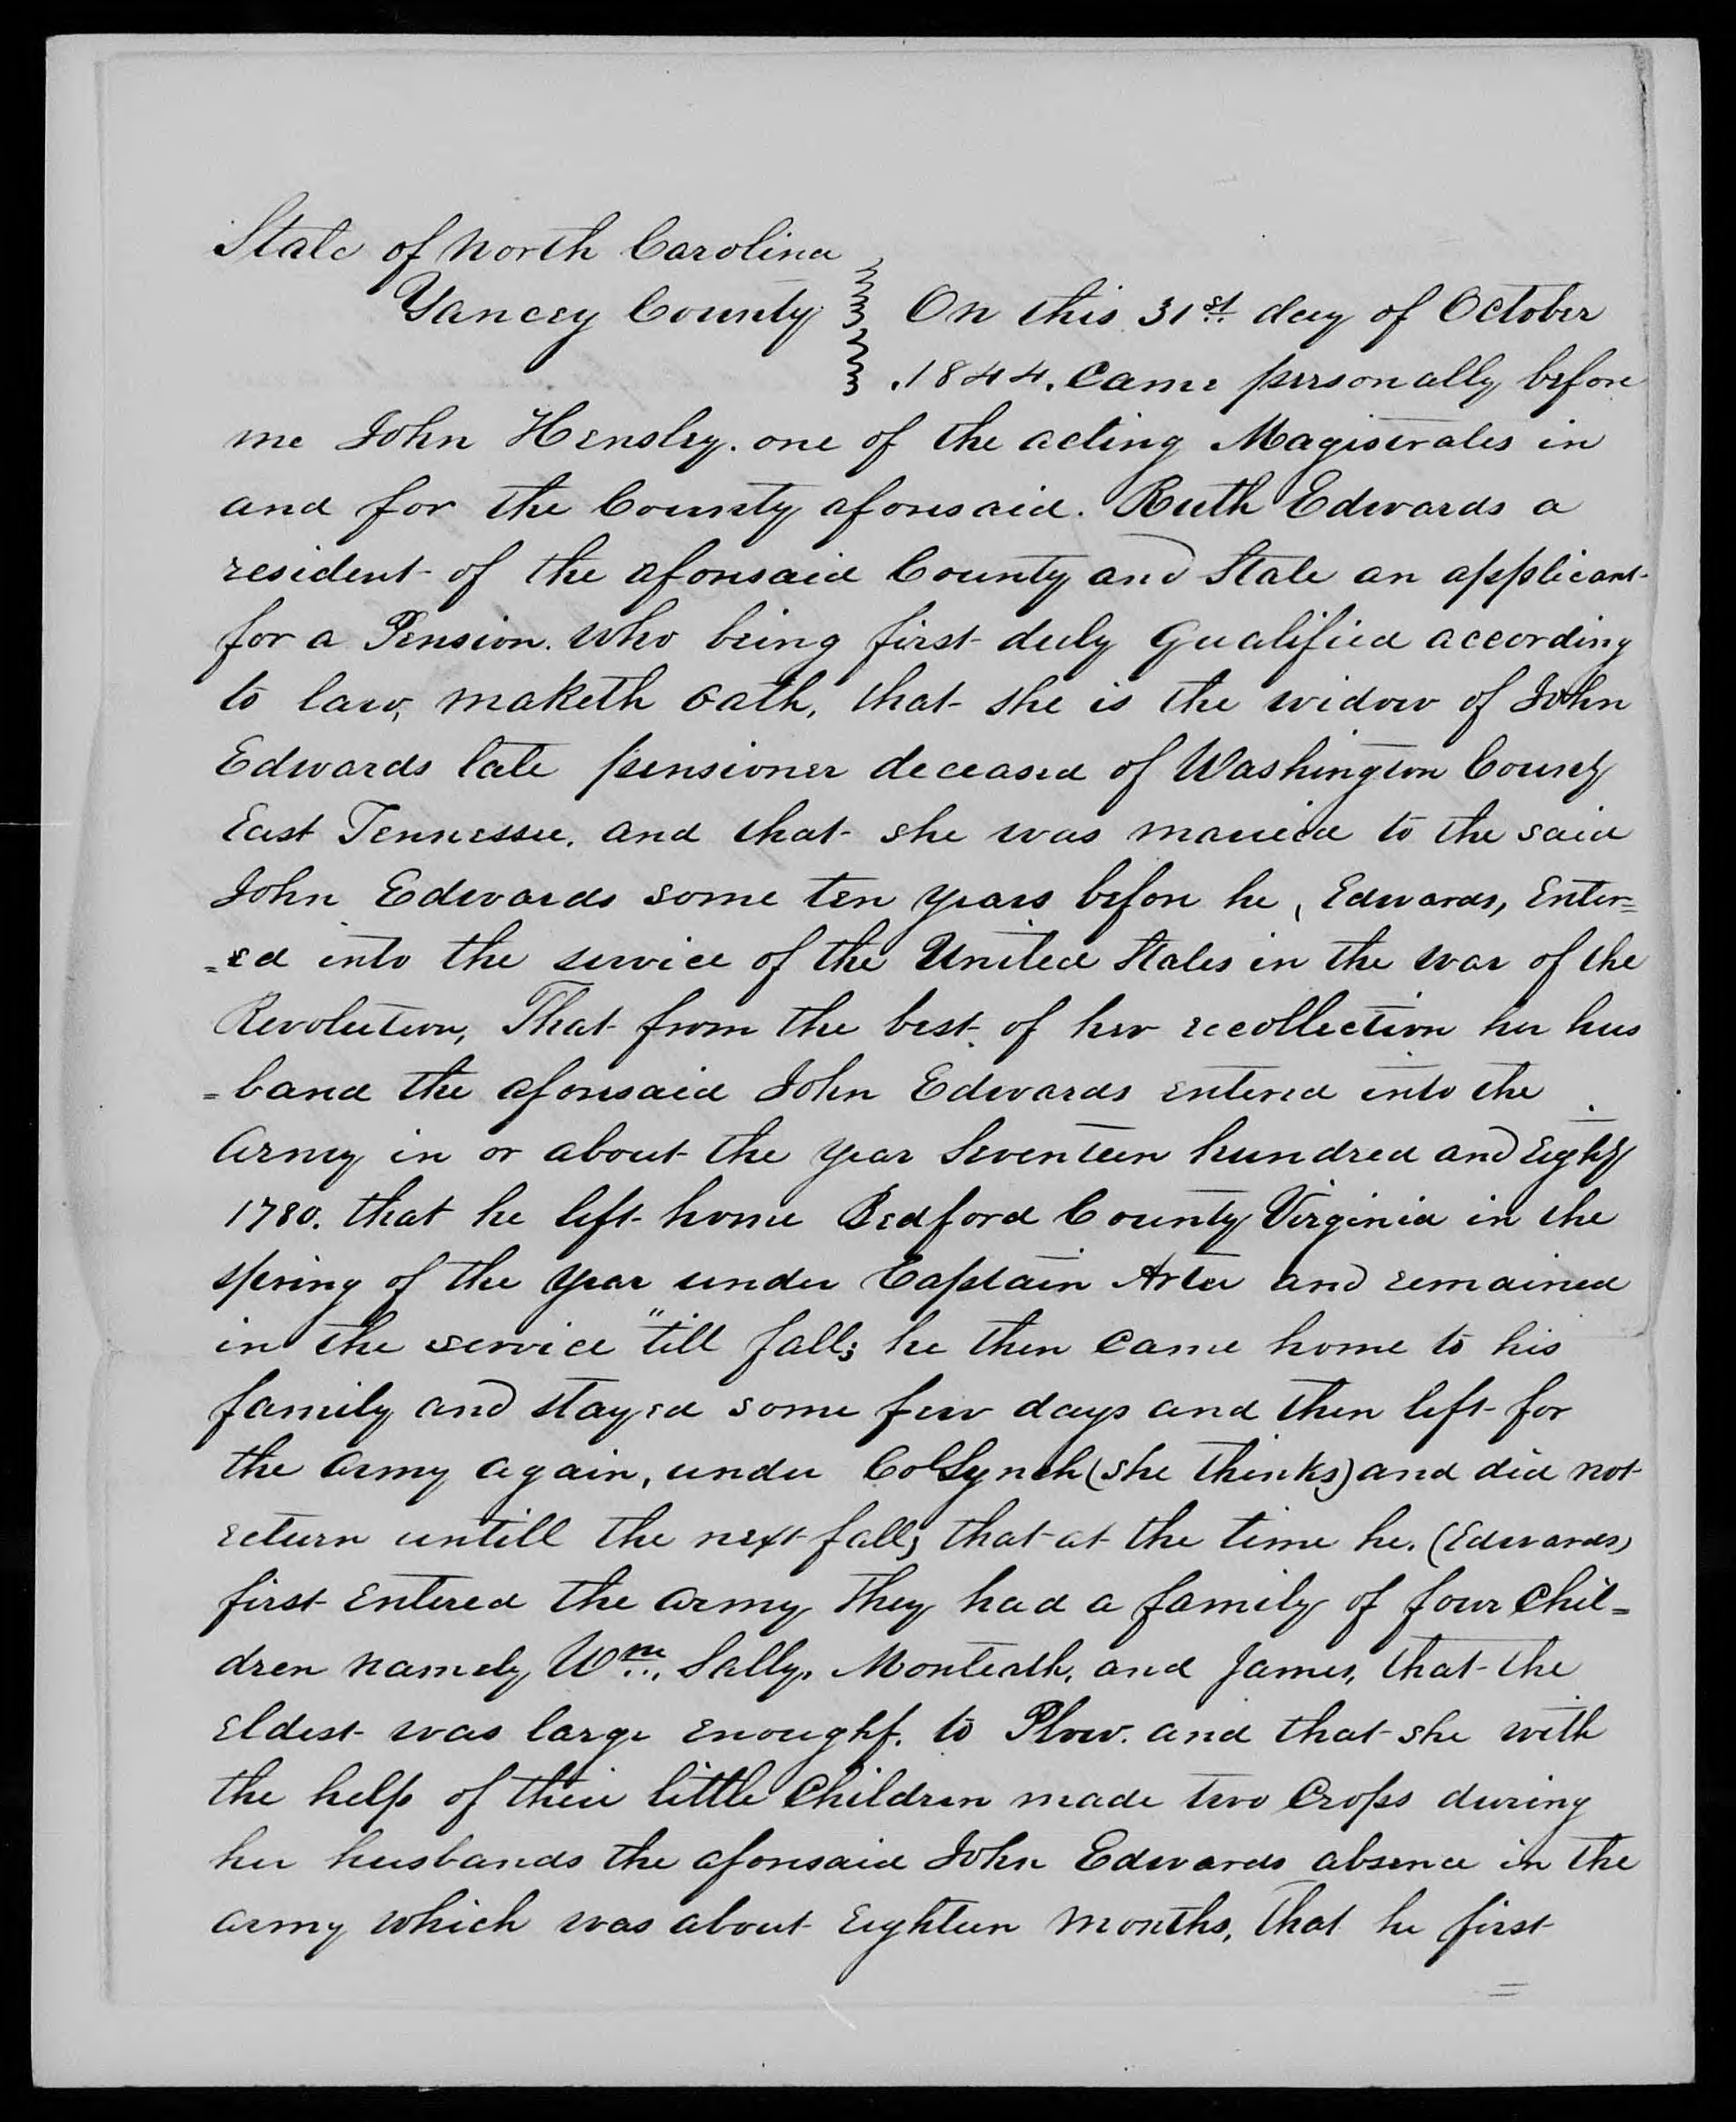  Application for a Widow's Pension from Ruth Edwards, 31 October 1844, page 1